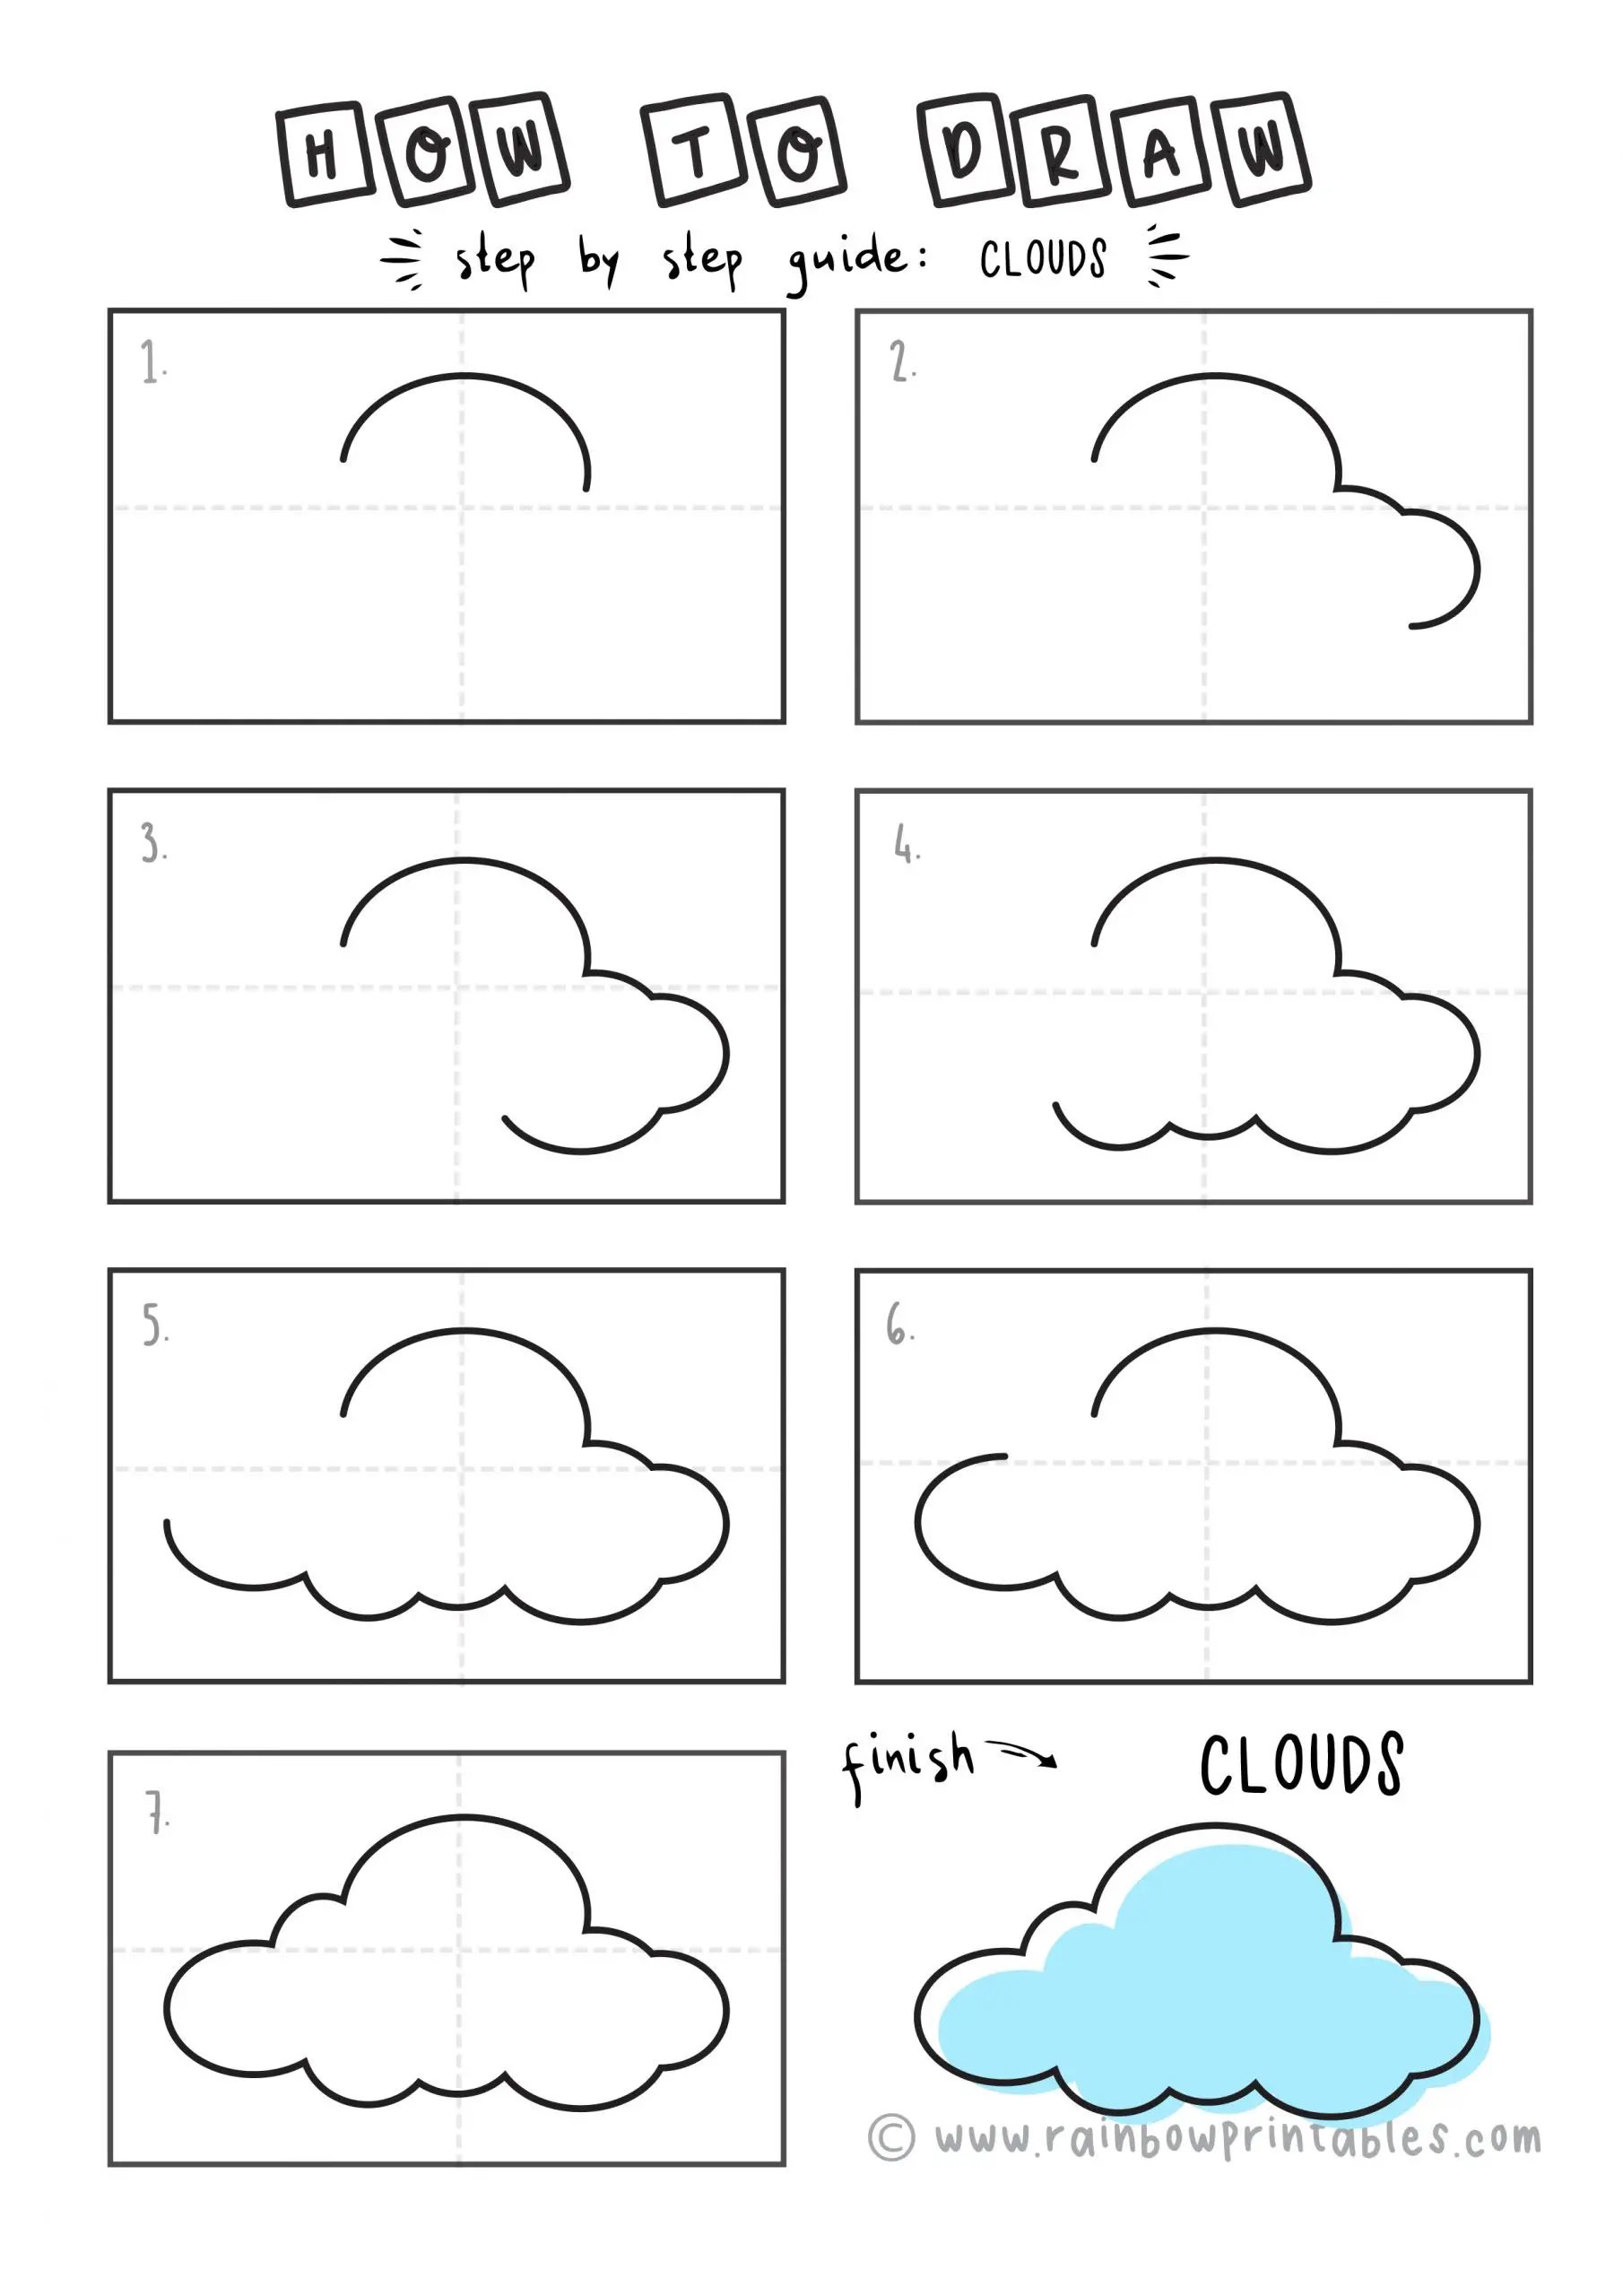 HOW TO DRAW CLOUDS FOR KIDS STEP BY STEP EASY PRESCHOOL ART scaled